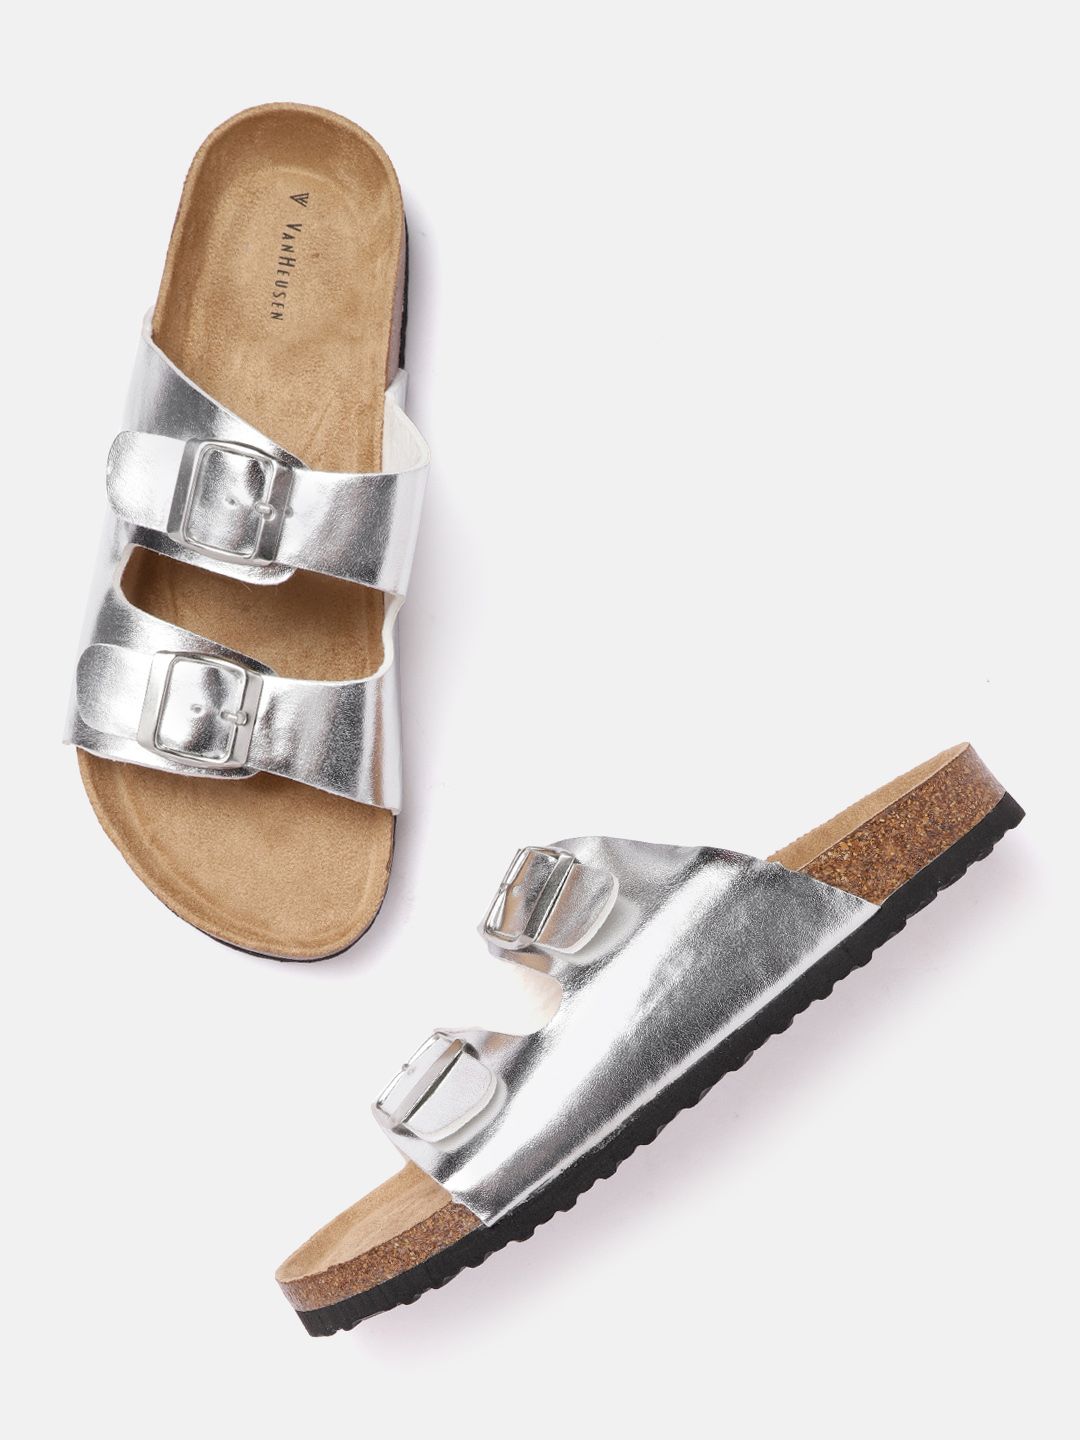 Van Heusen Woman Silver-Toned Open Toe Flats with Buckles Price in India